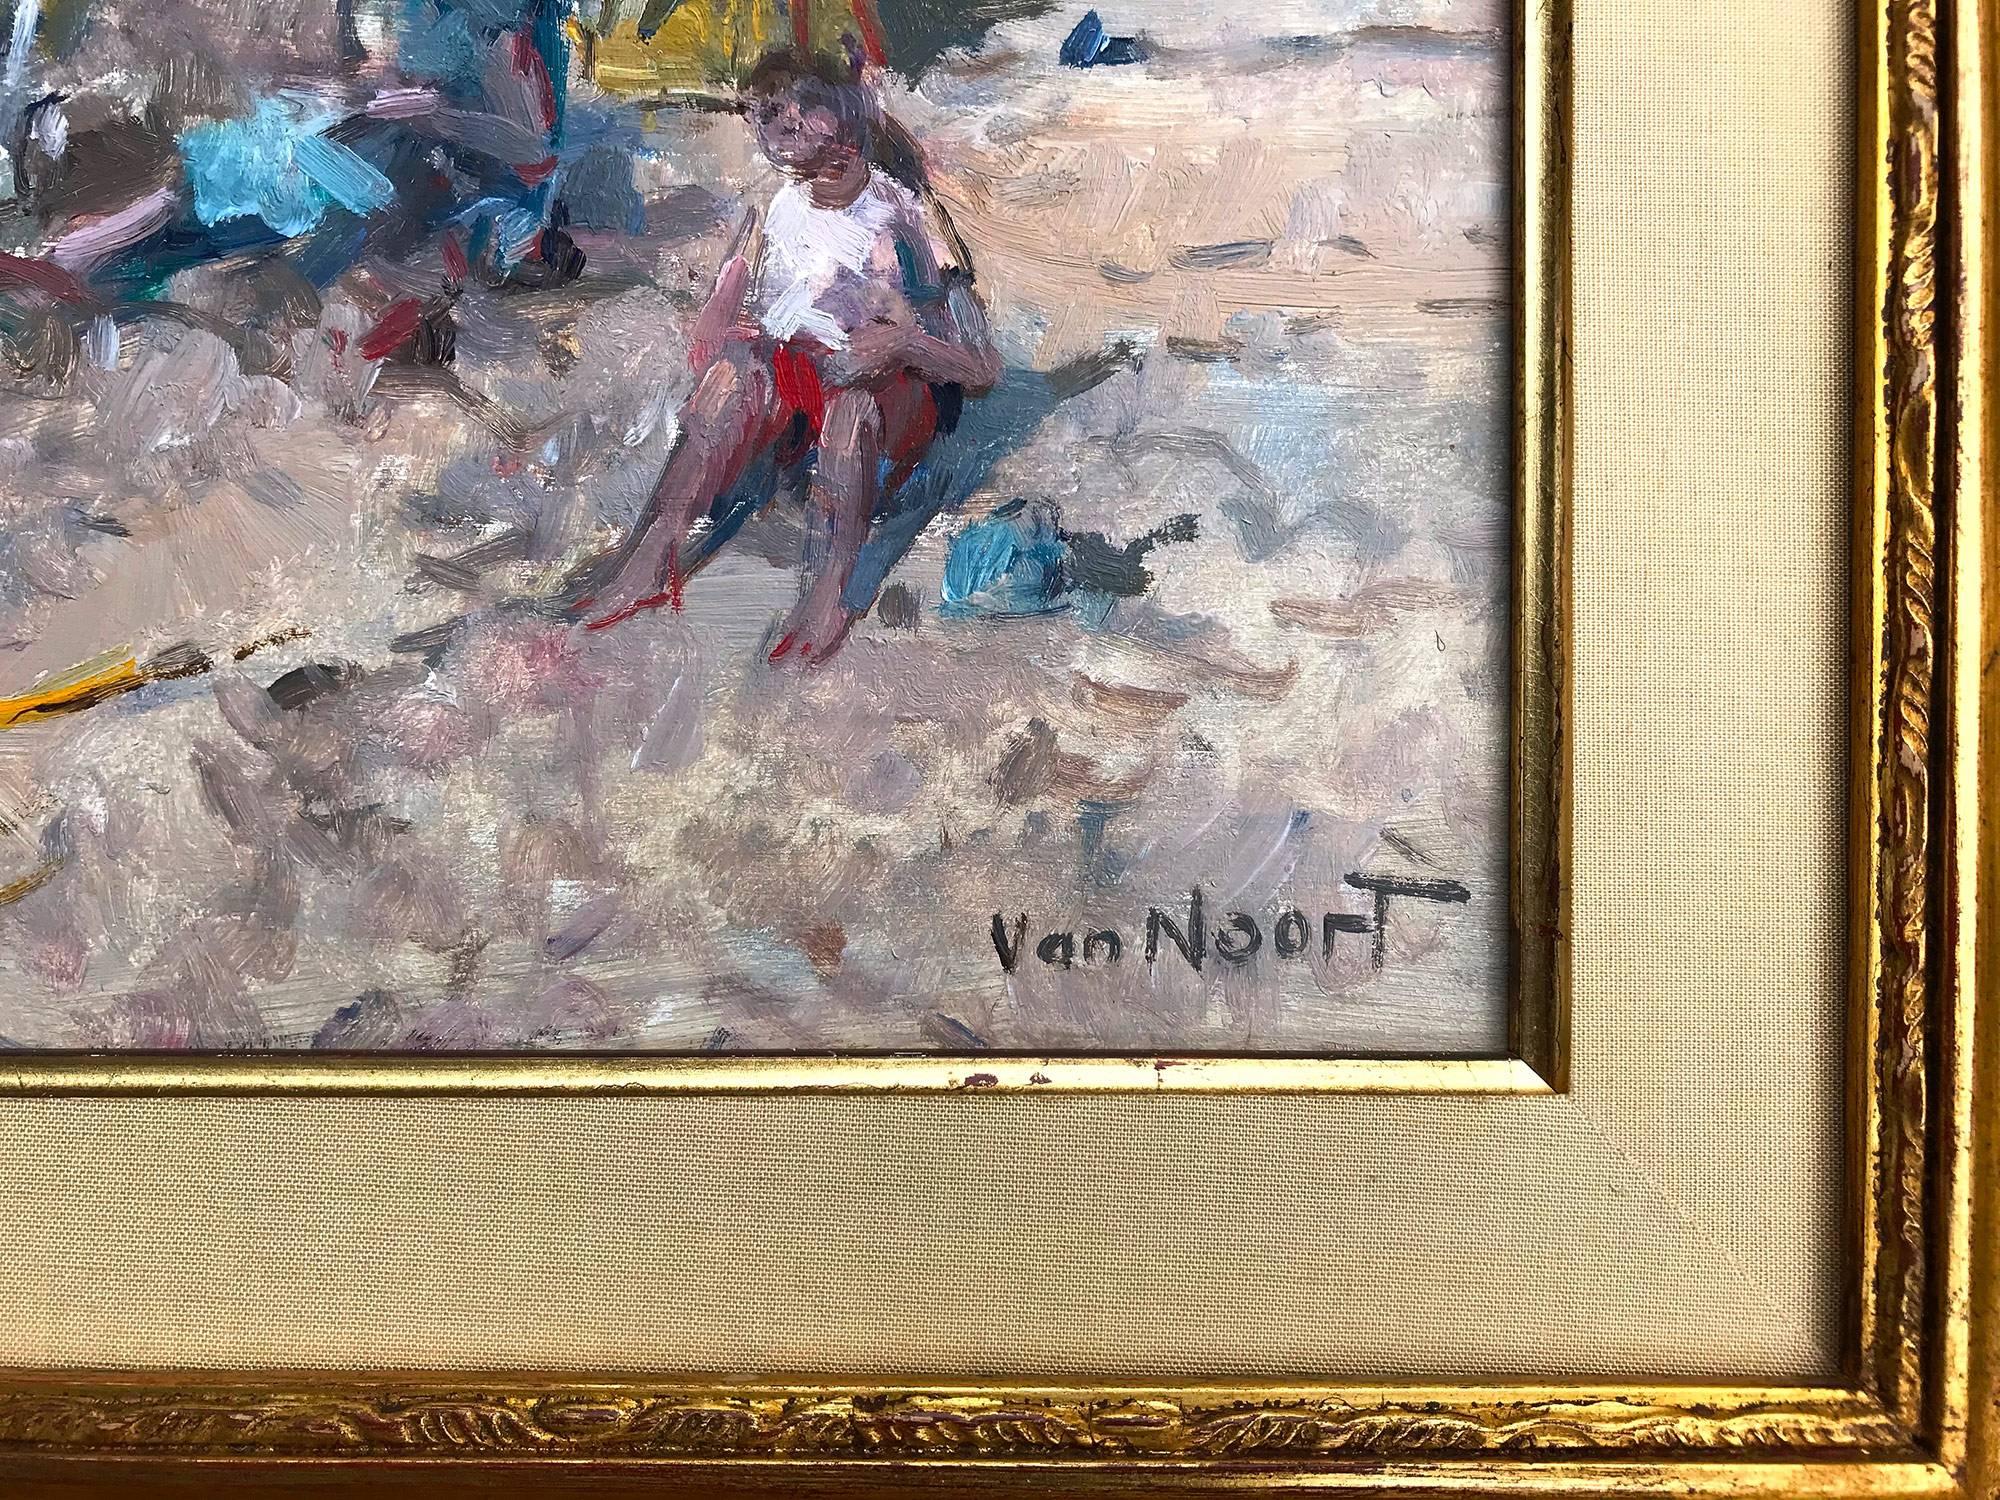 Beach Scene with Figures and Parasol - Impressionist Painting by Arie C. Van Noort